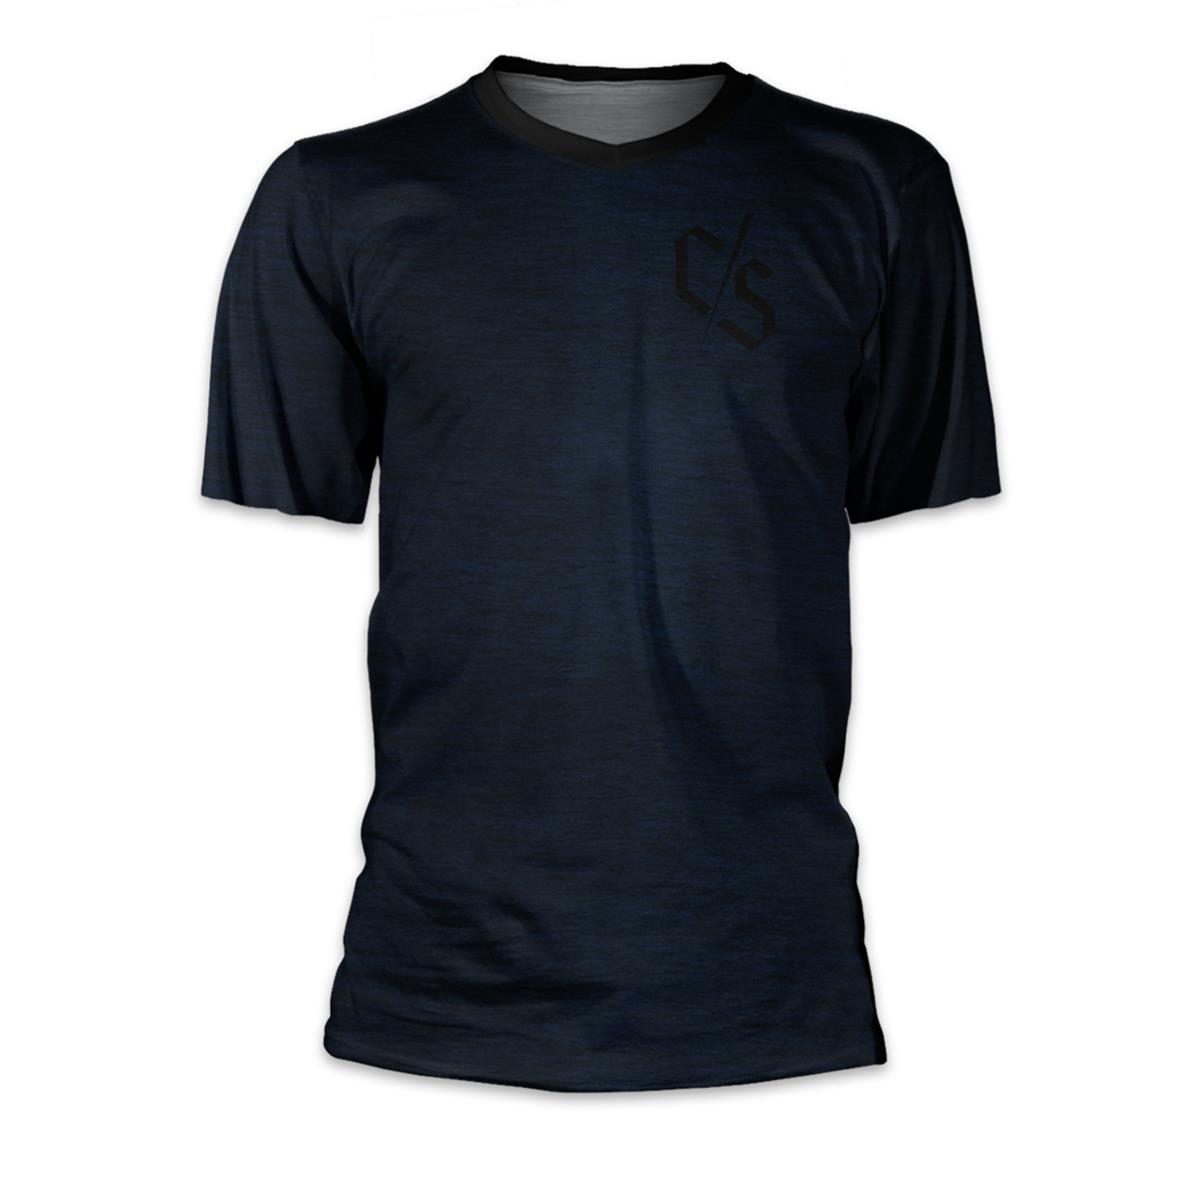 Loose Riders Trail Jersey Short Sleeve C/S Black Heather Navy